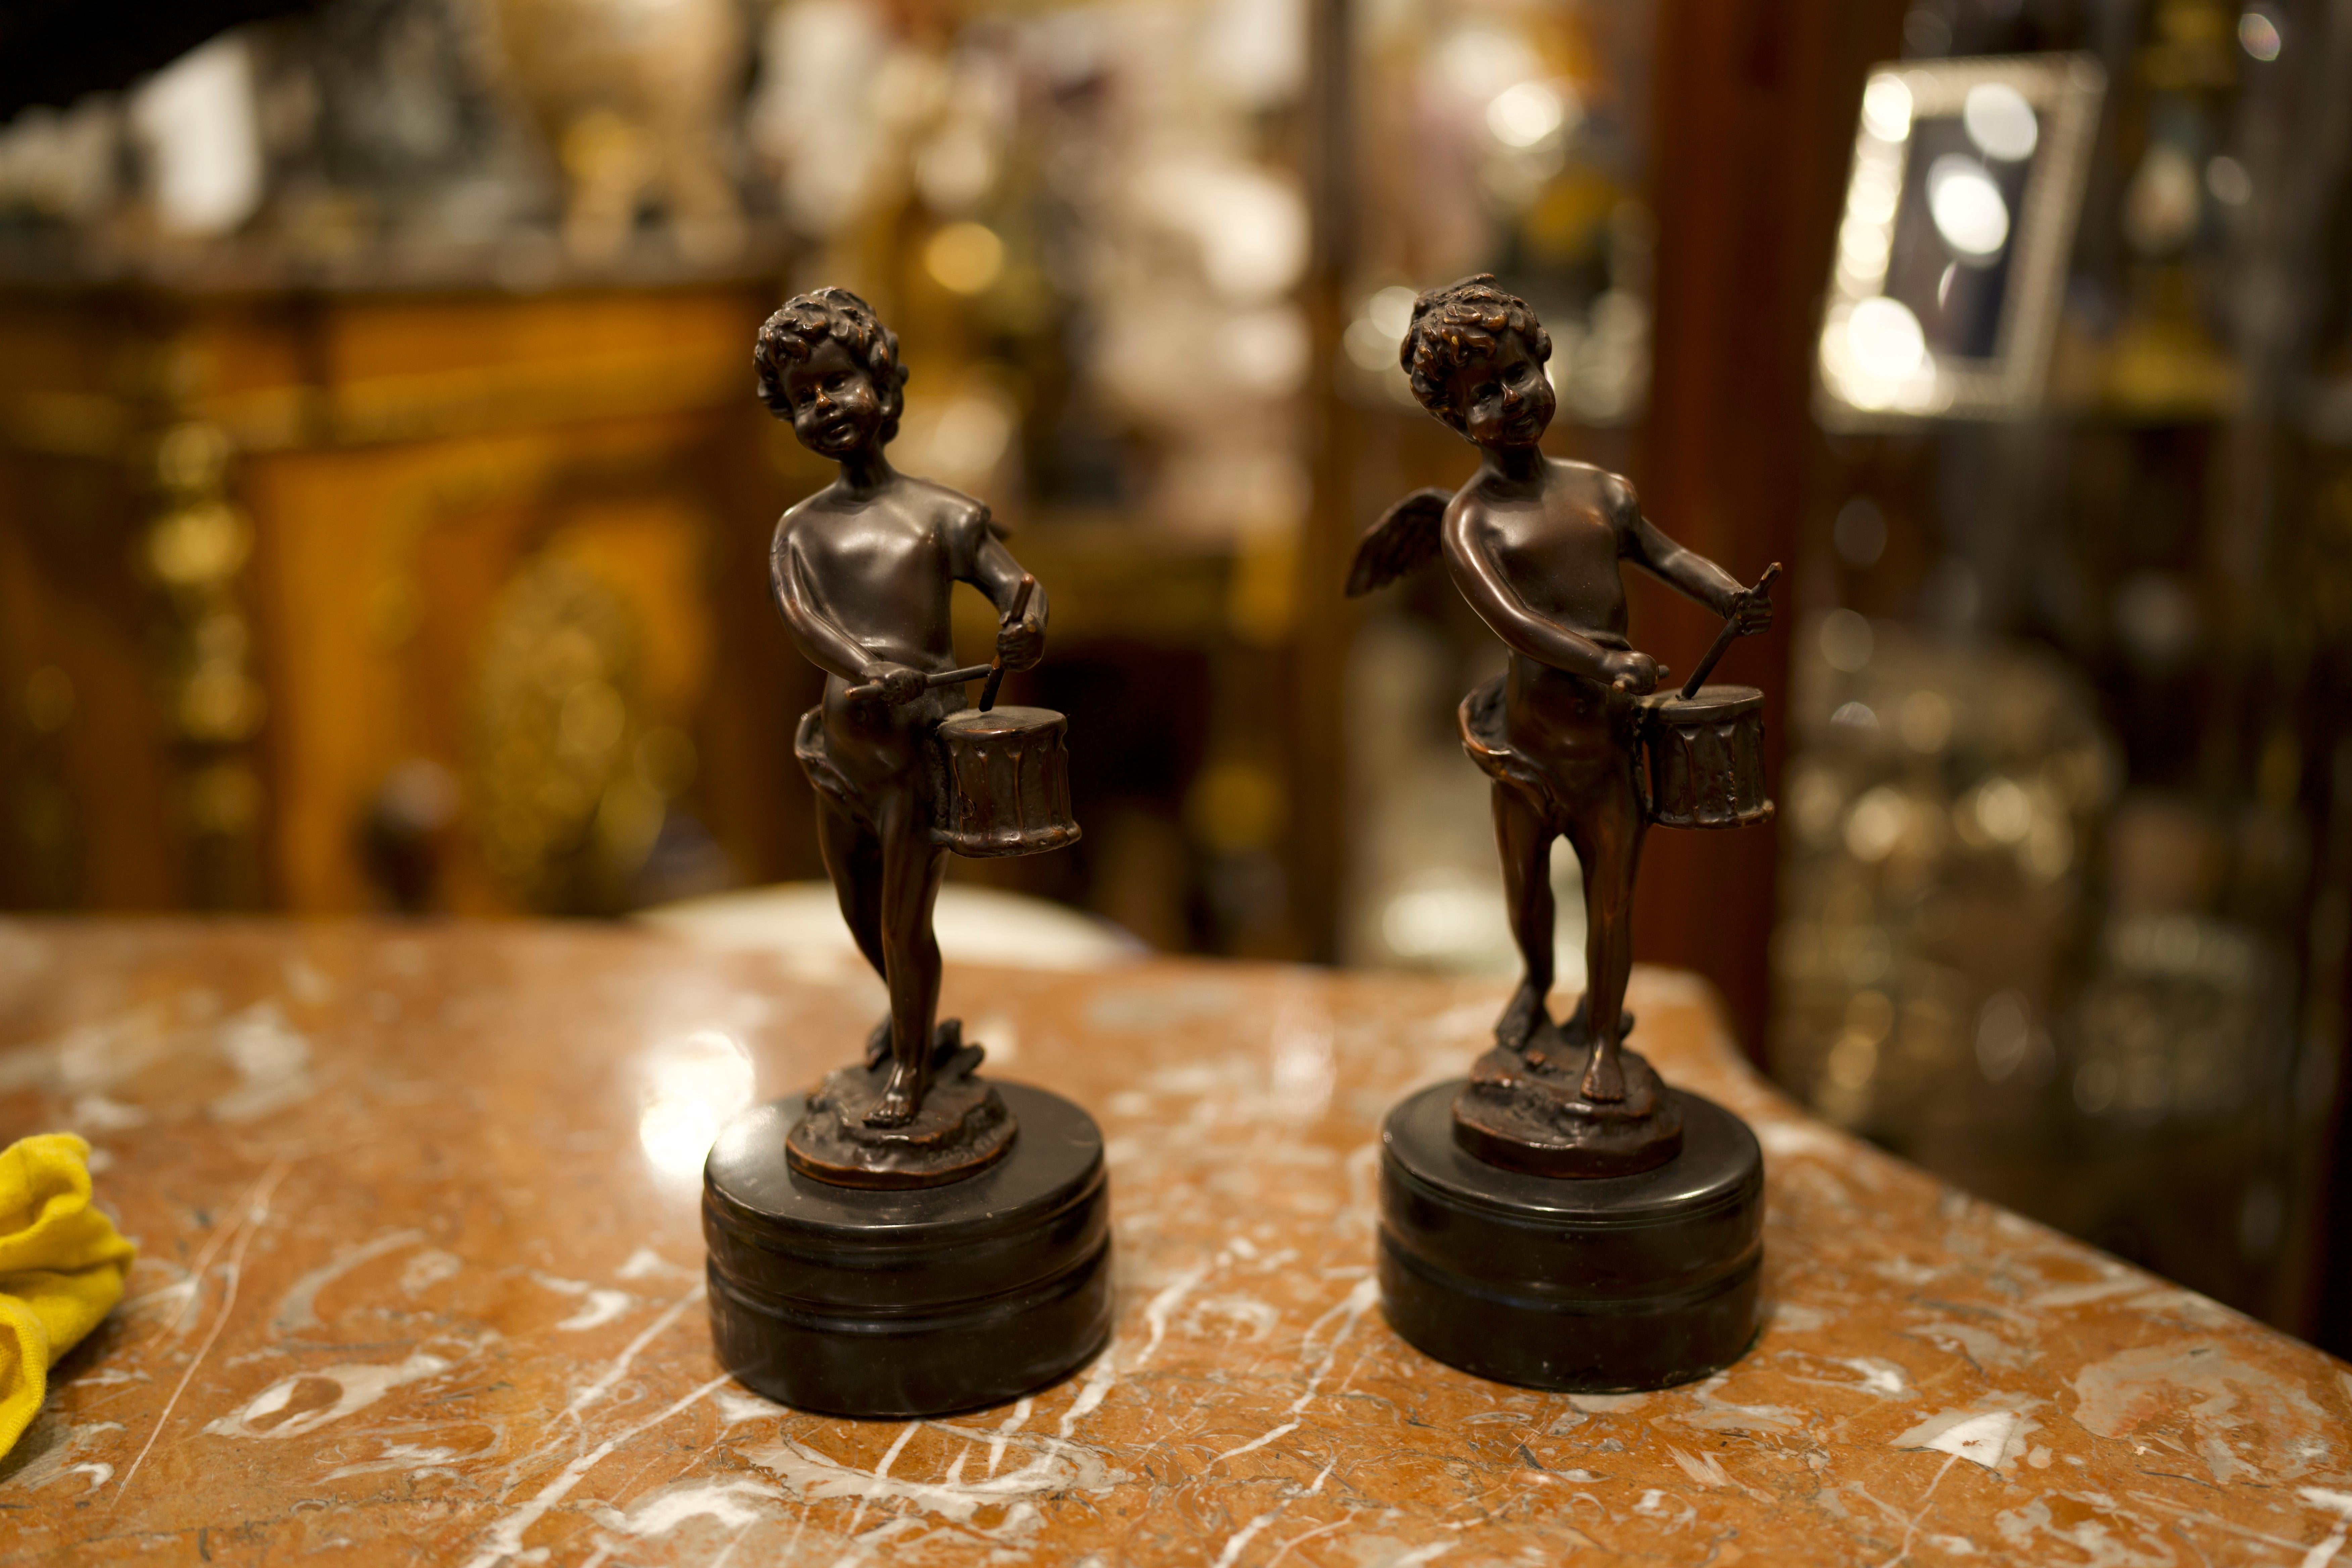 Pair of French Bronze Cherubs sculptures playing the drums. Perfect for home decor and interior design.